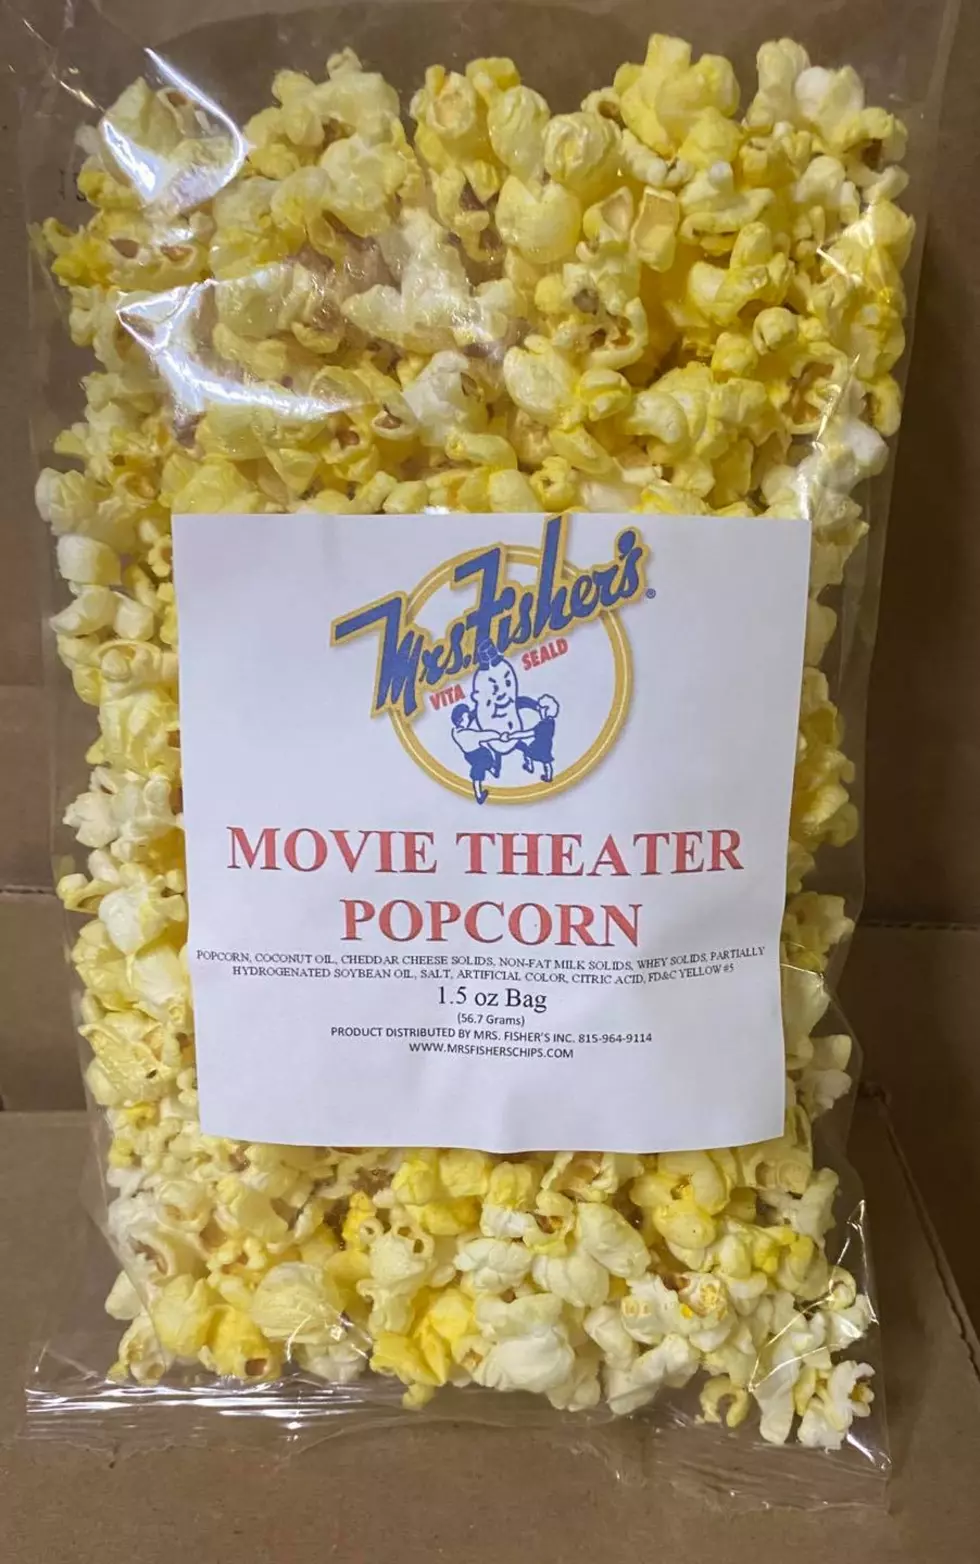 OMG! Mrs. Fisher’s Now Has Movie Theater Popcorn